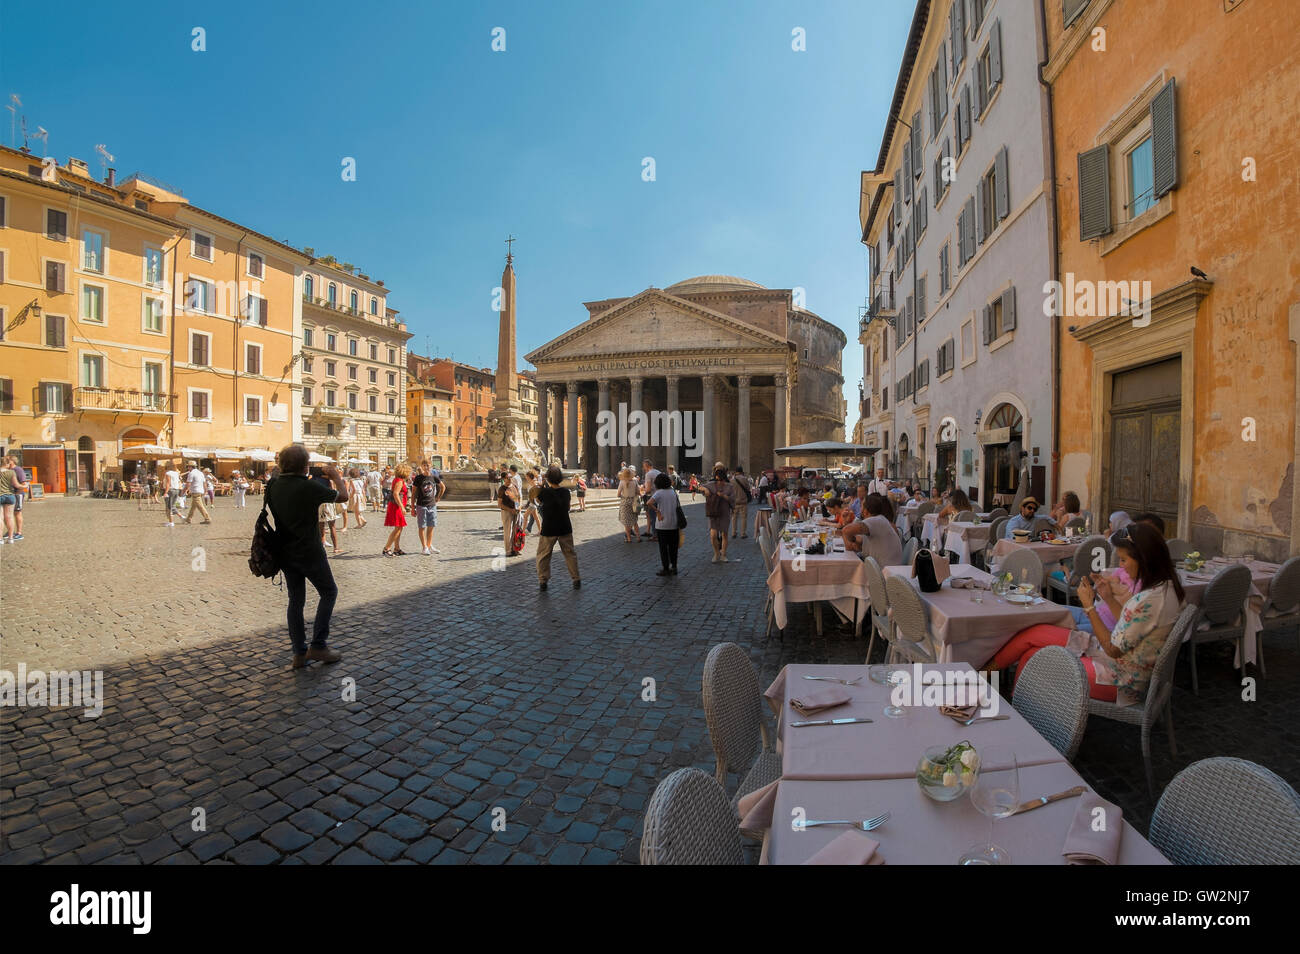 People dining in the Pantheon square in Rome, Italy Stock Photo